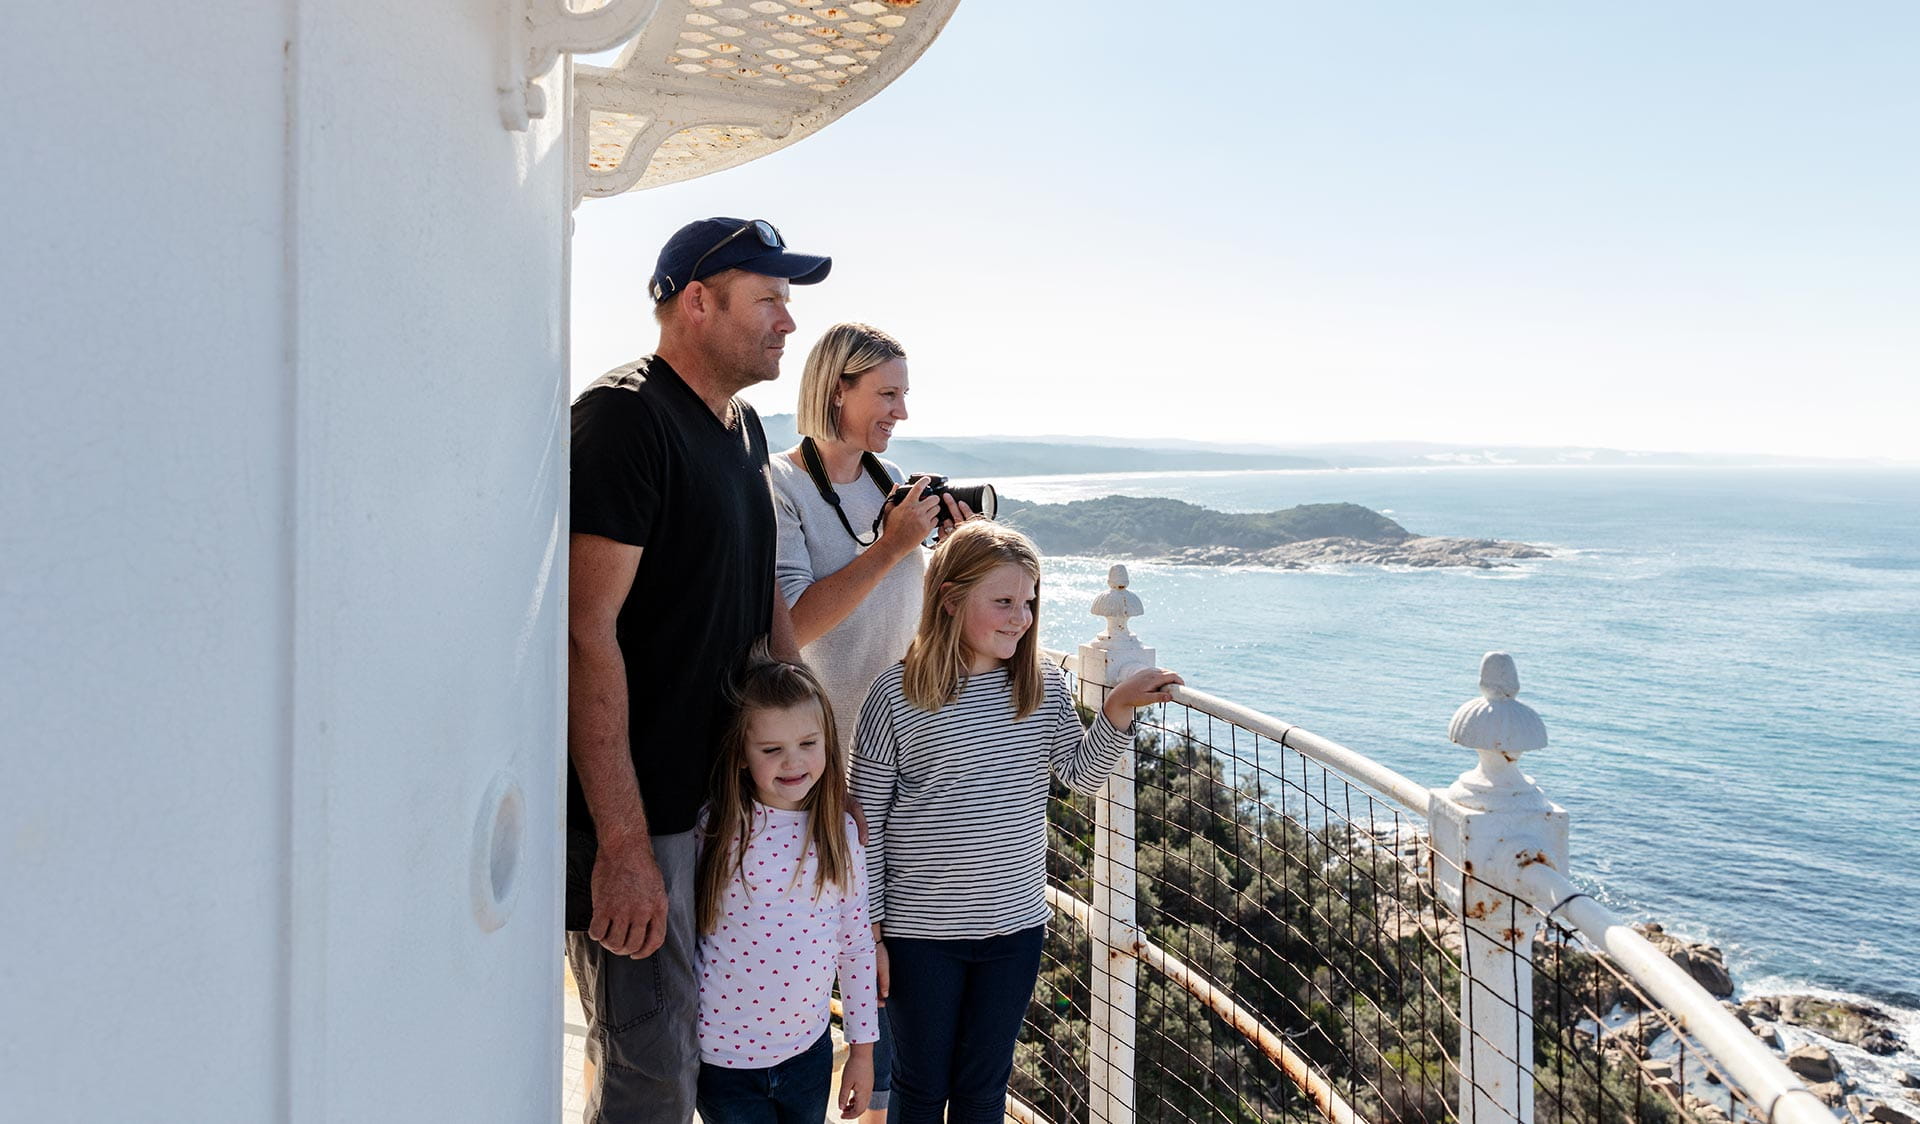 A mother, father and their two young daughts gaze out at the sea from the lookout point of the lighthouse.